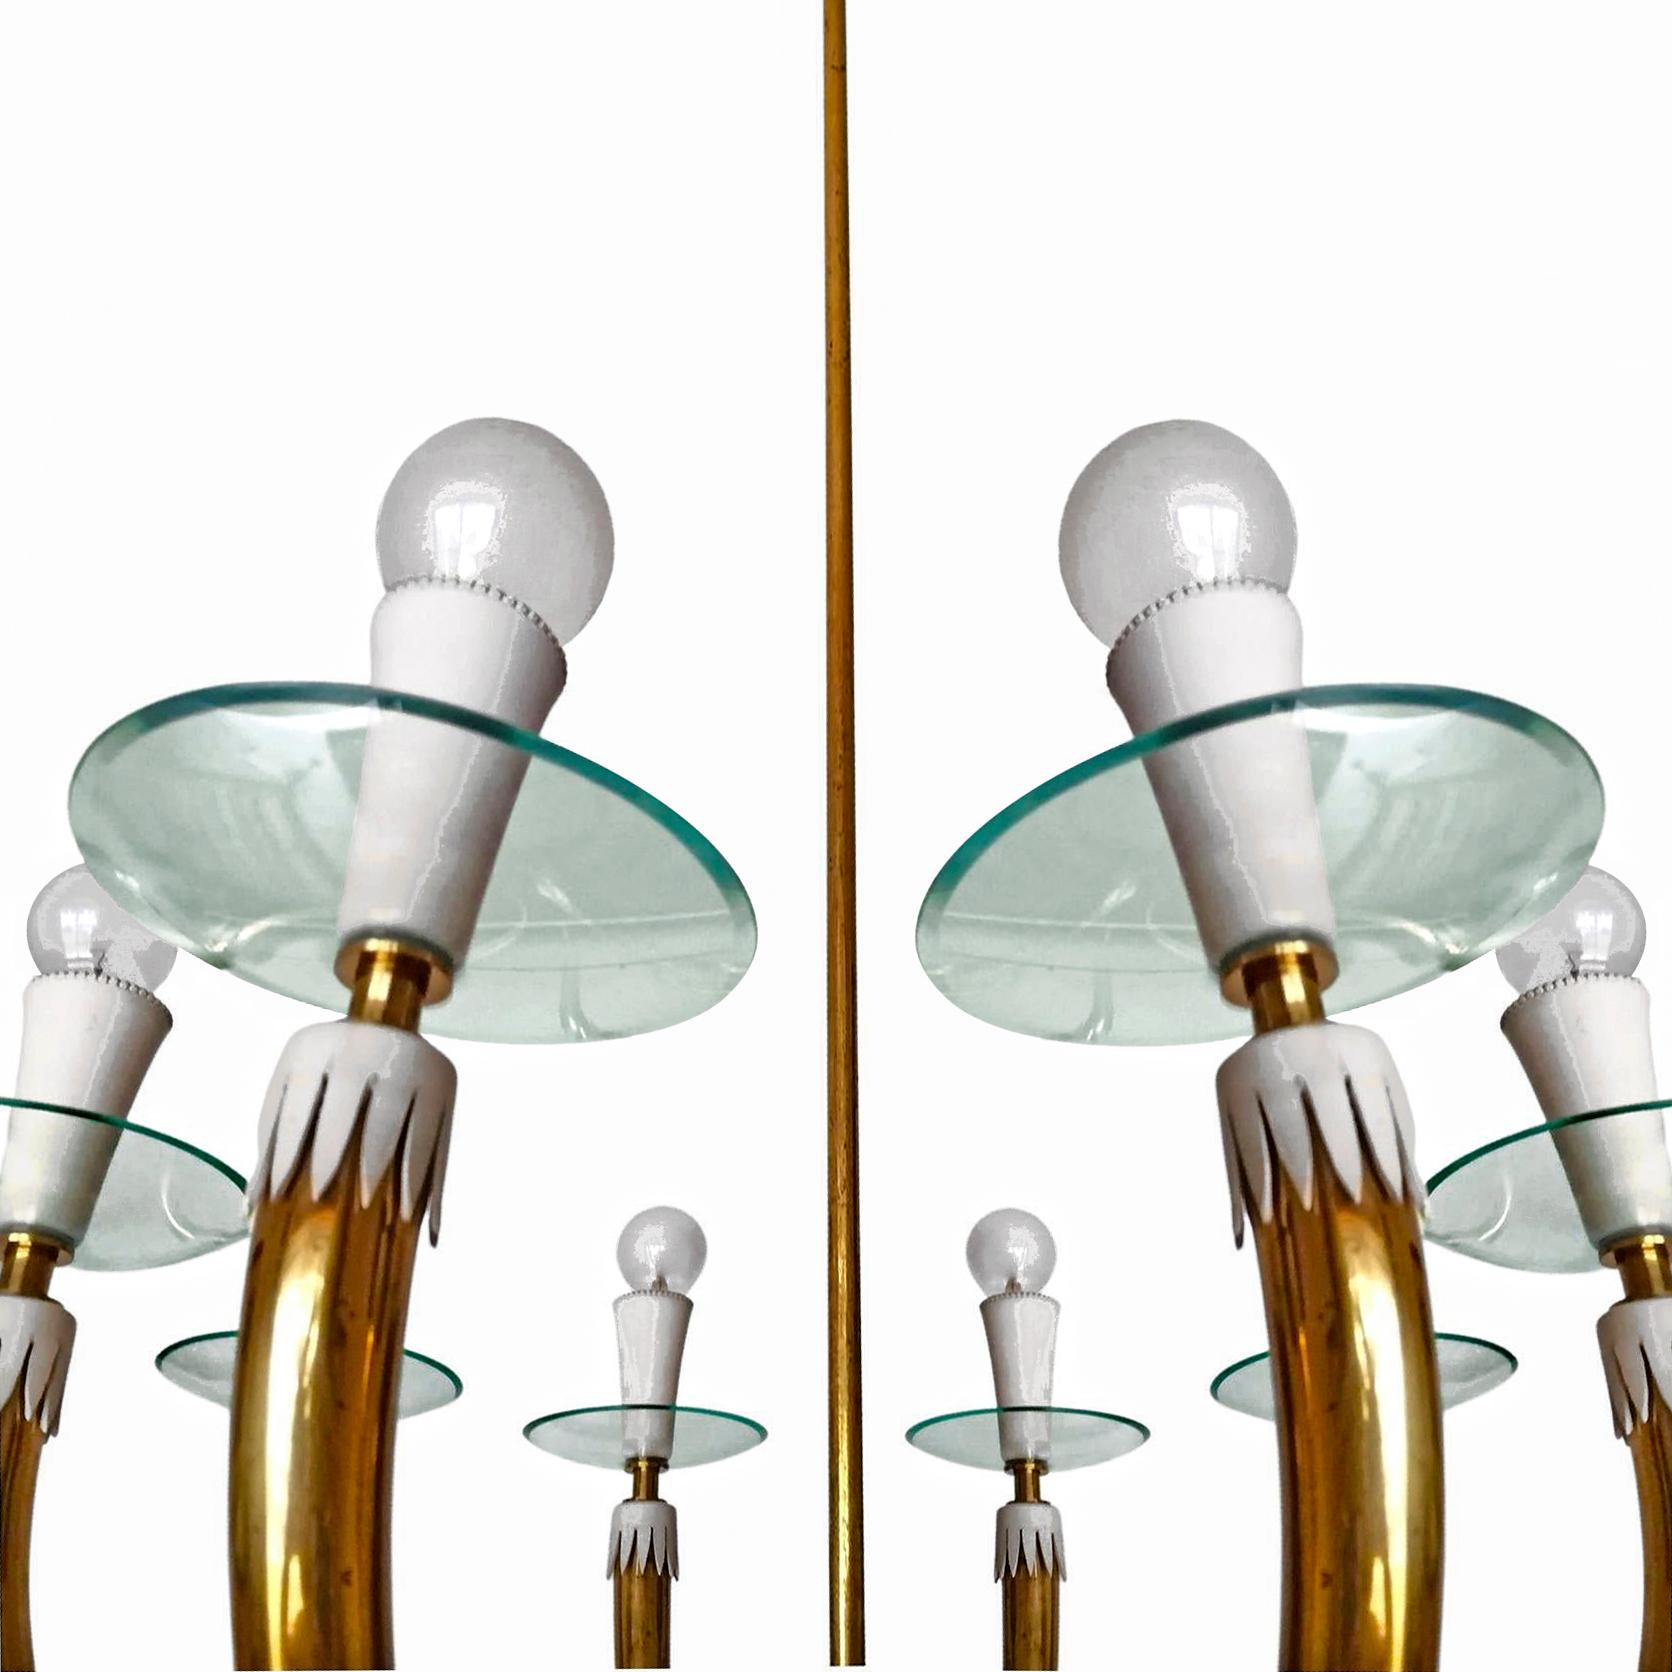 This original brass chandelier from the 1950s is attributed to Gio Ponti (1891-1979) and Emilio Lancia (1890-1973). Made of solid polished brass, white lacquered aluminum and 8 bevelled convex crystal glass discs. This large Mid-Century Modern